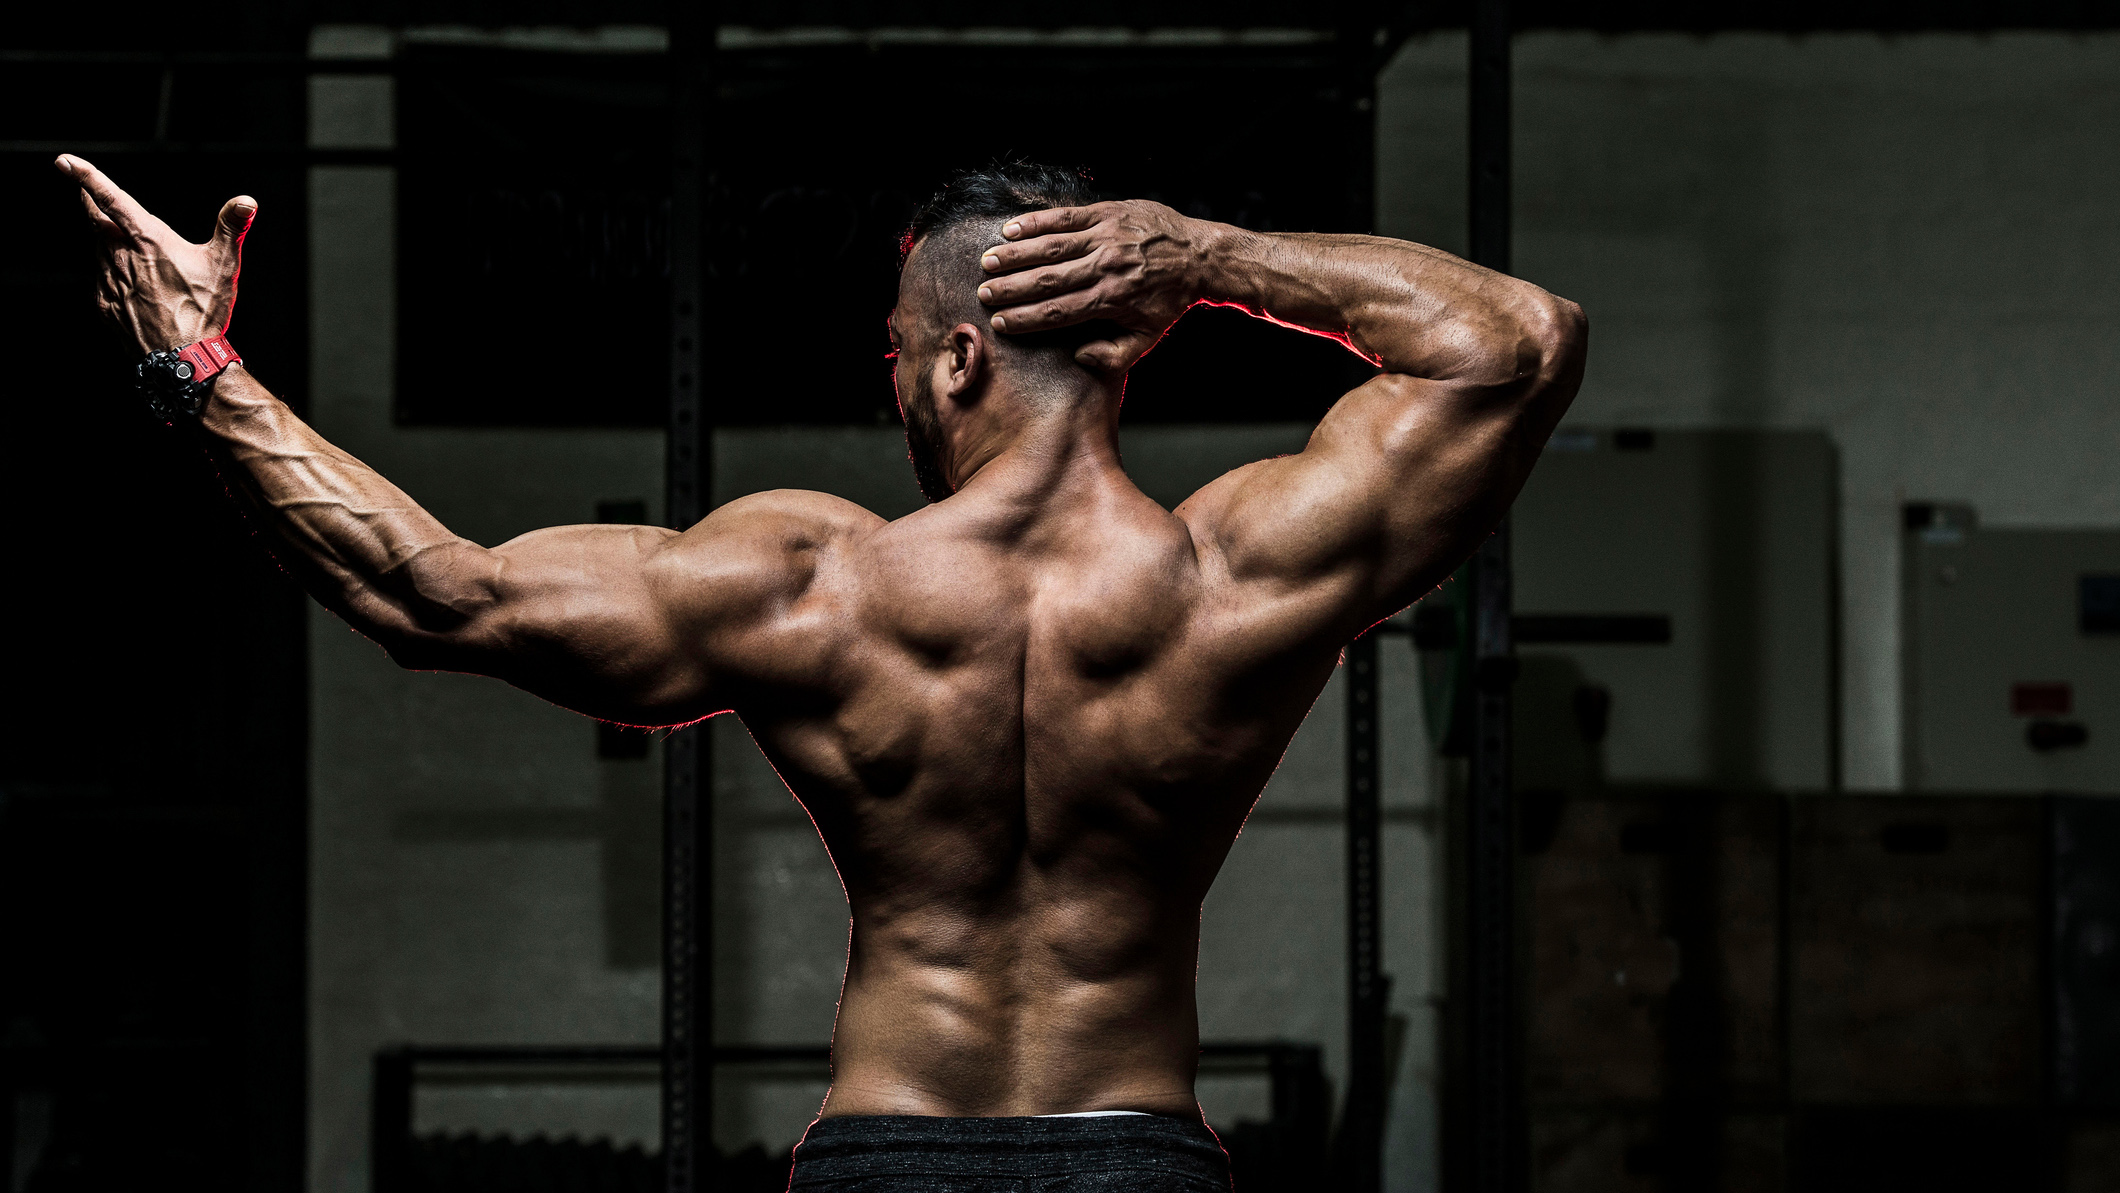 Best Back Exercises The Best Lats Workouts To Reduce Back Pain Gain Muscle And Get A V Shape T3